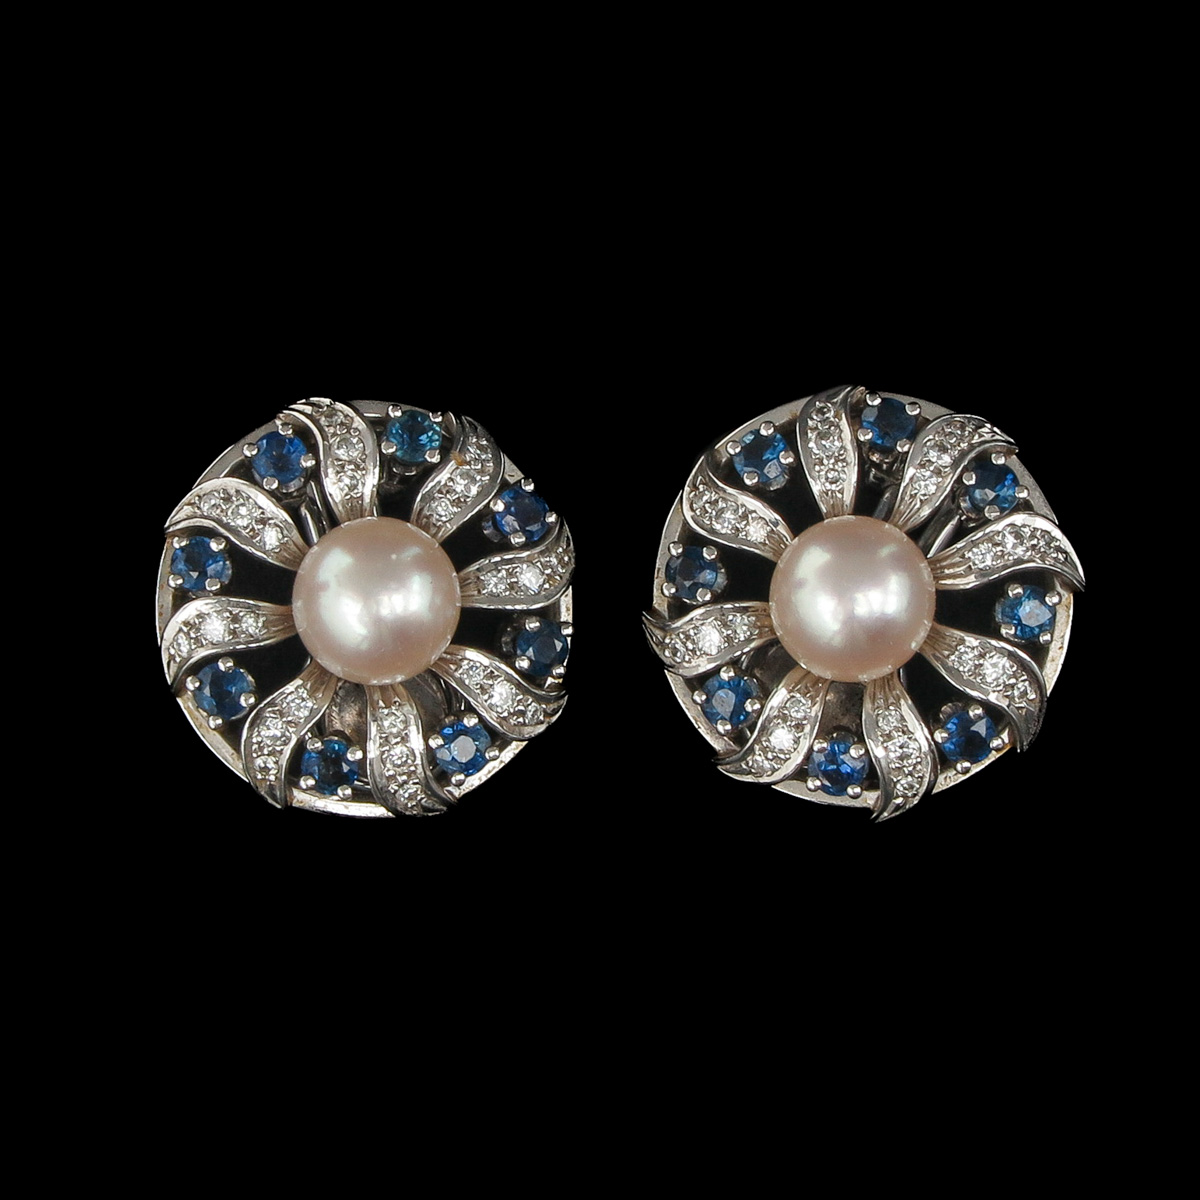 A Set of Pearl Jewelry - Image 2 of 10